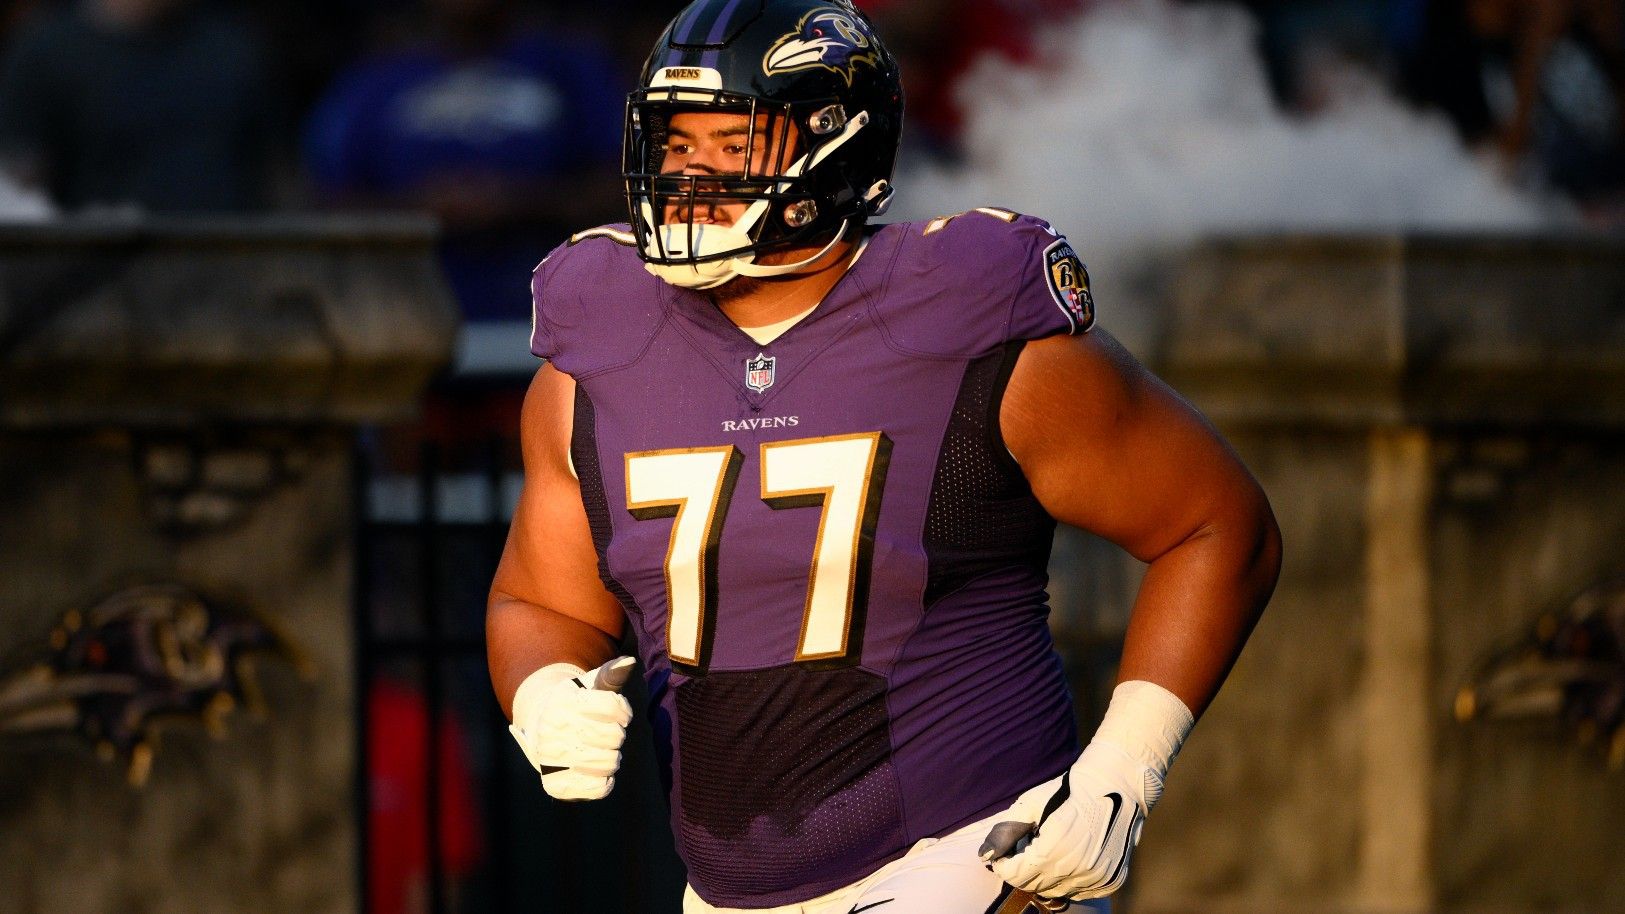 EXCLUSIVE: Daniel Faalele 'staying ready' as NFL debut looms on the horizon